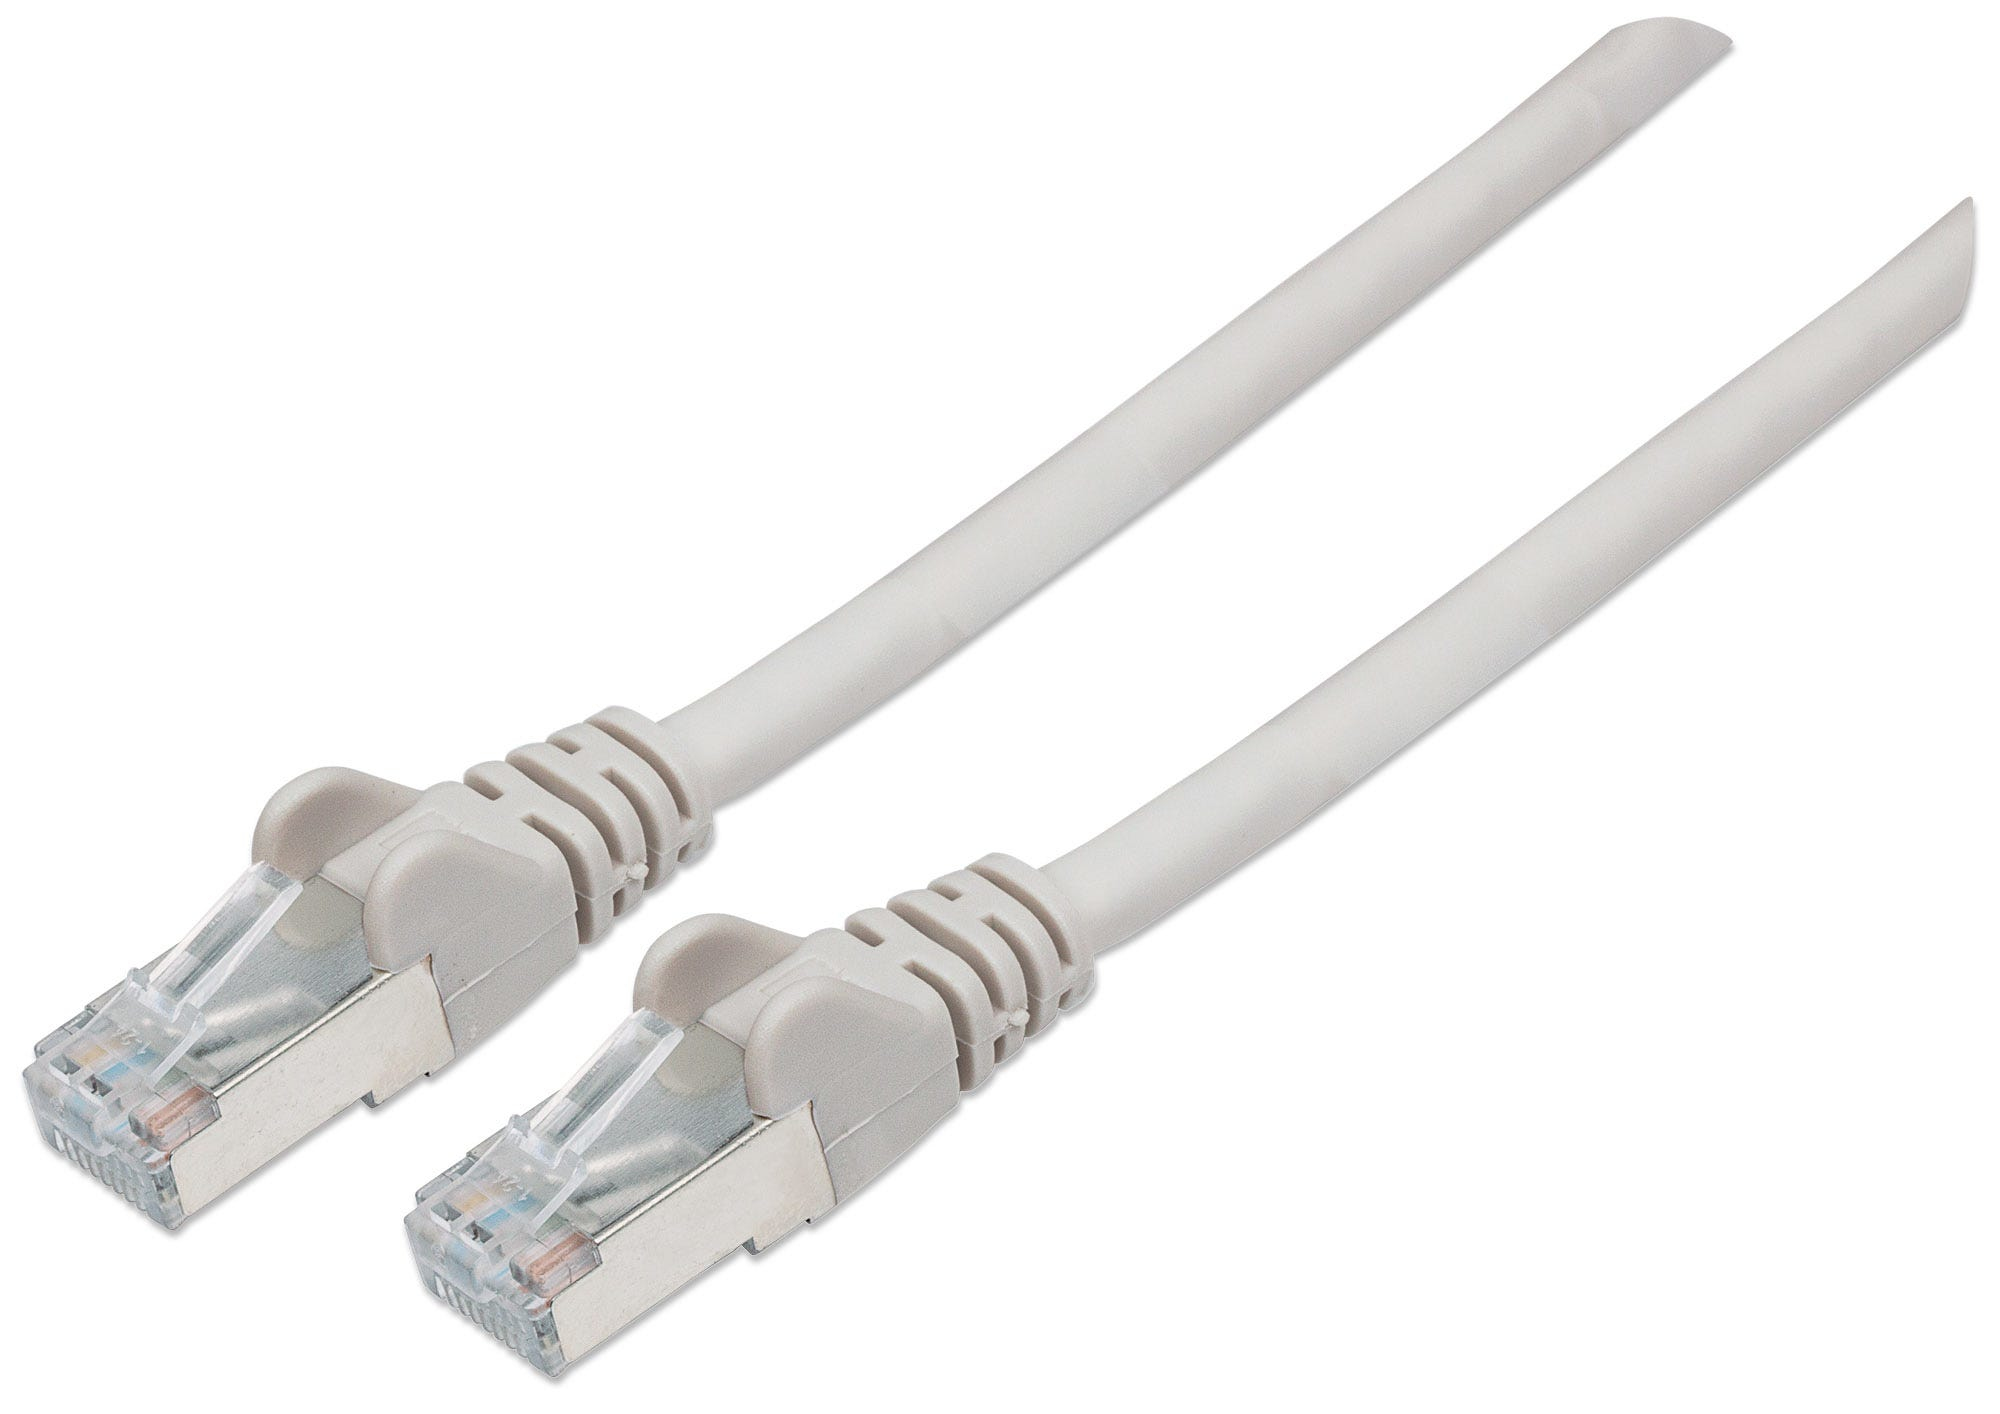 Photos - Cable (video, audio, USB) INTELLINET Network Patch Cable, Cat6, 0.25m, Grey, Copper, S/FTP, LSOH 739 